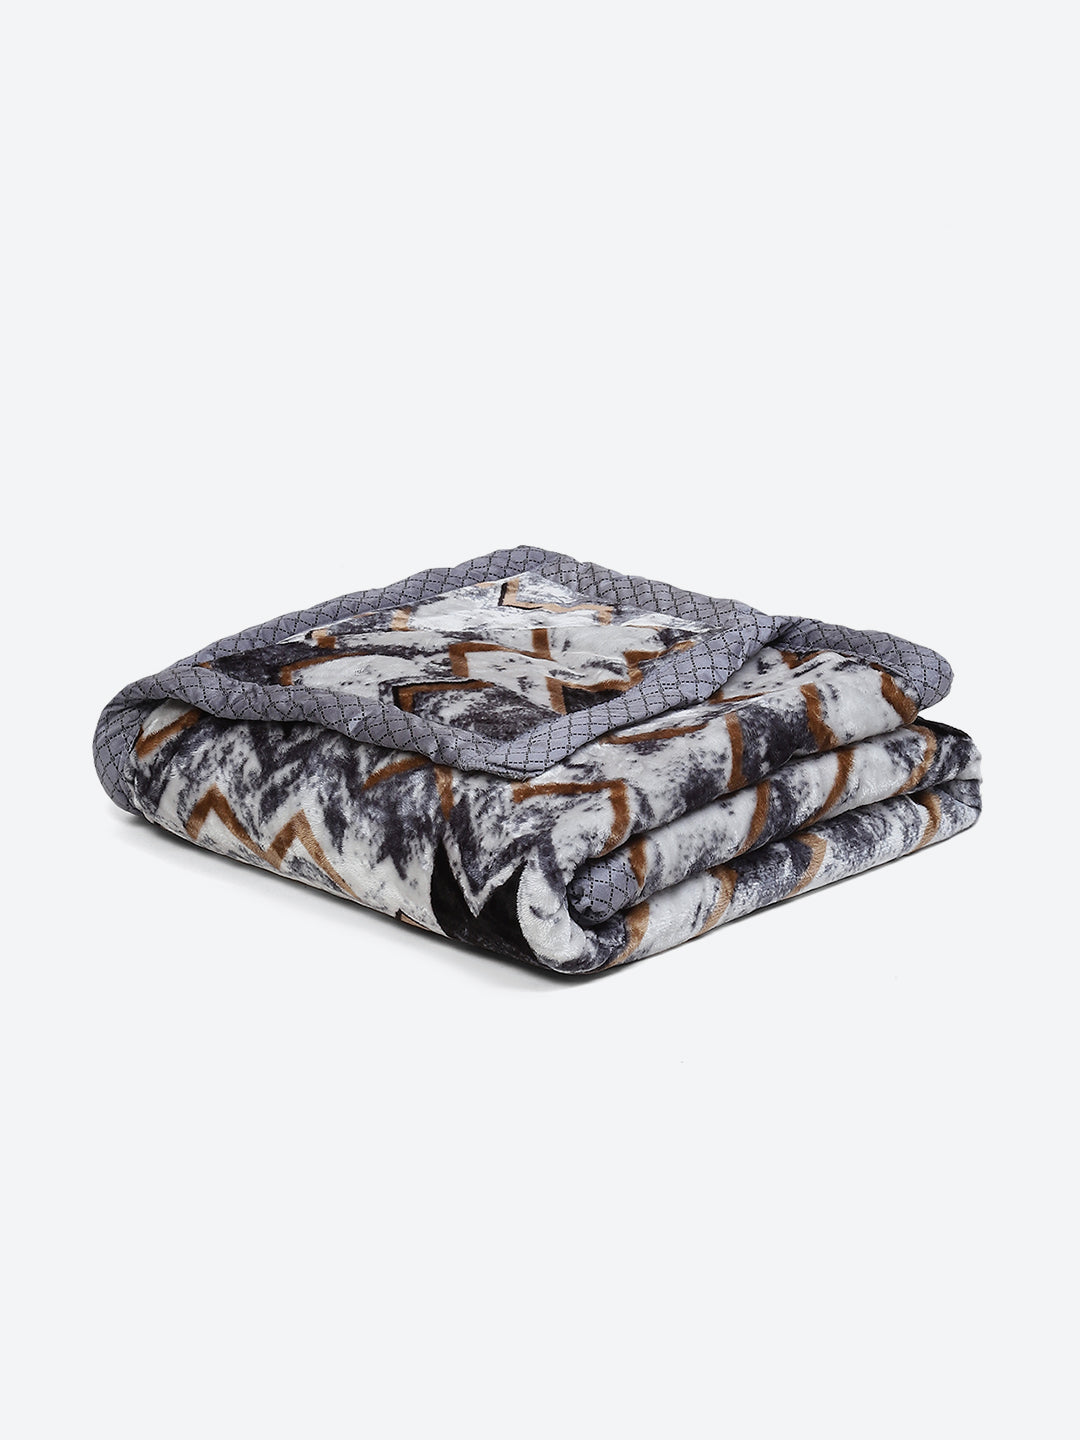 Printed Single Bed Blanket for Mild Winter -1 Ply